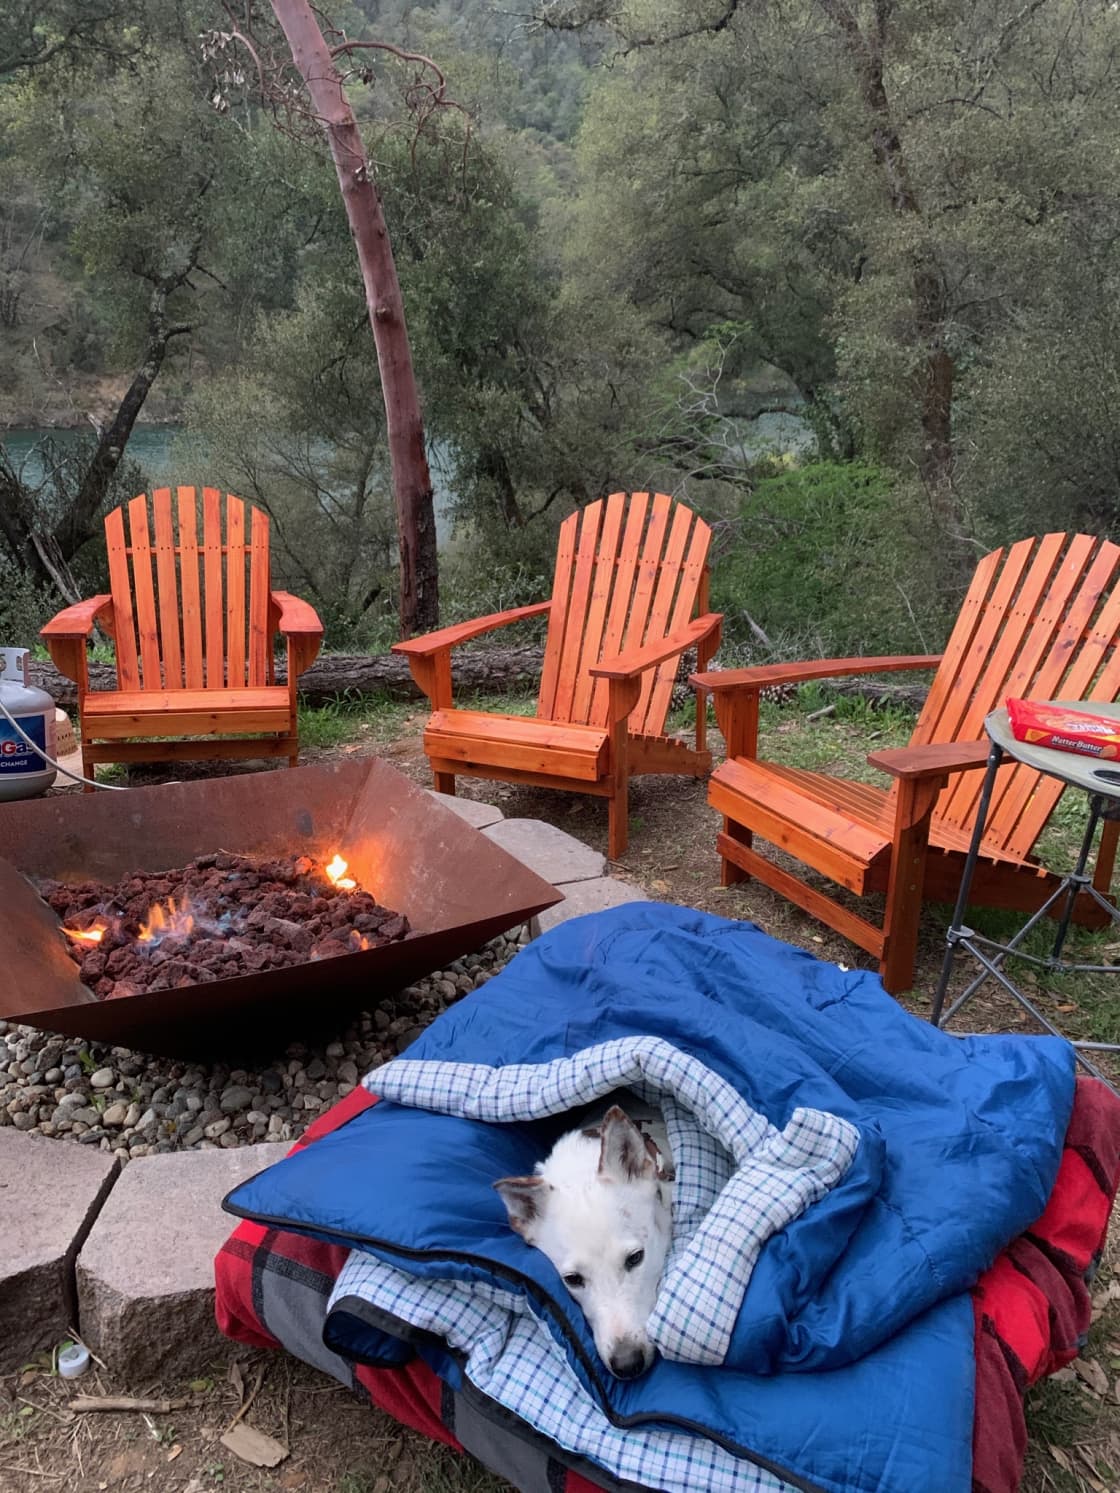 Group Campsite on the Yuba River!